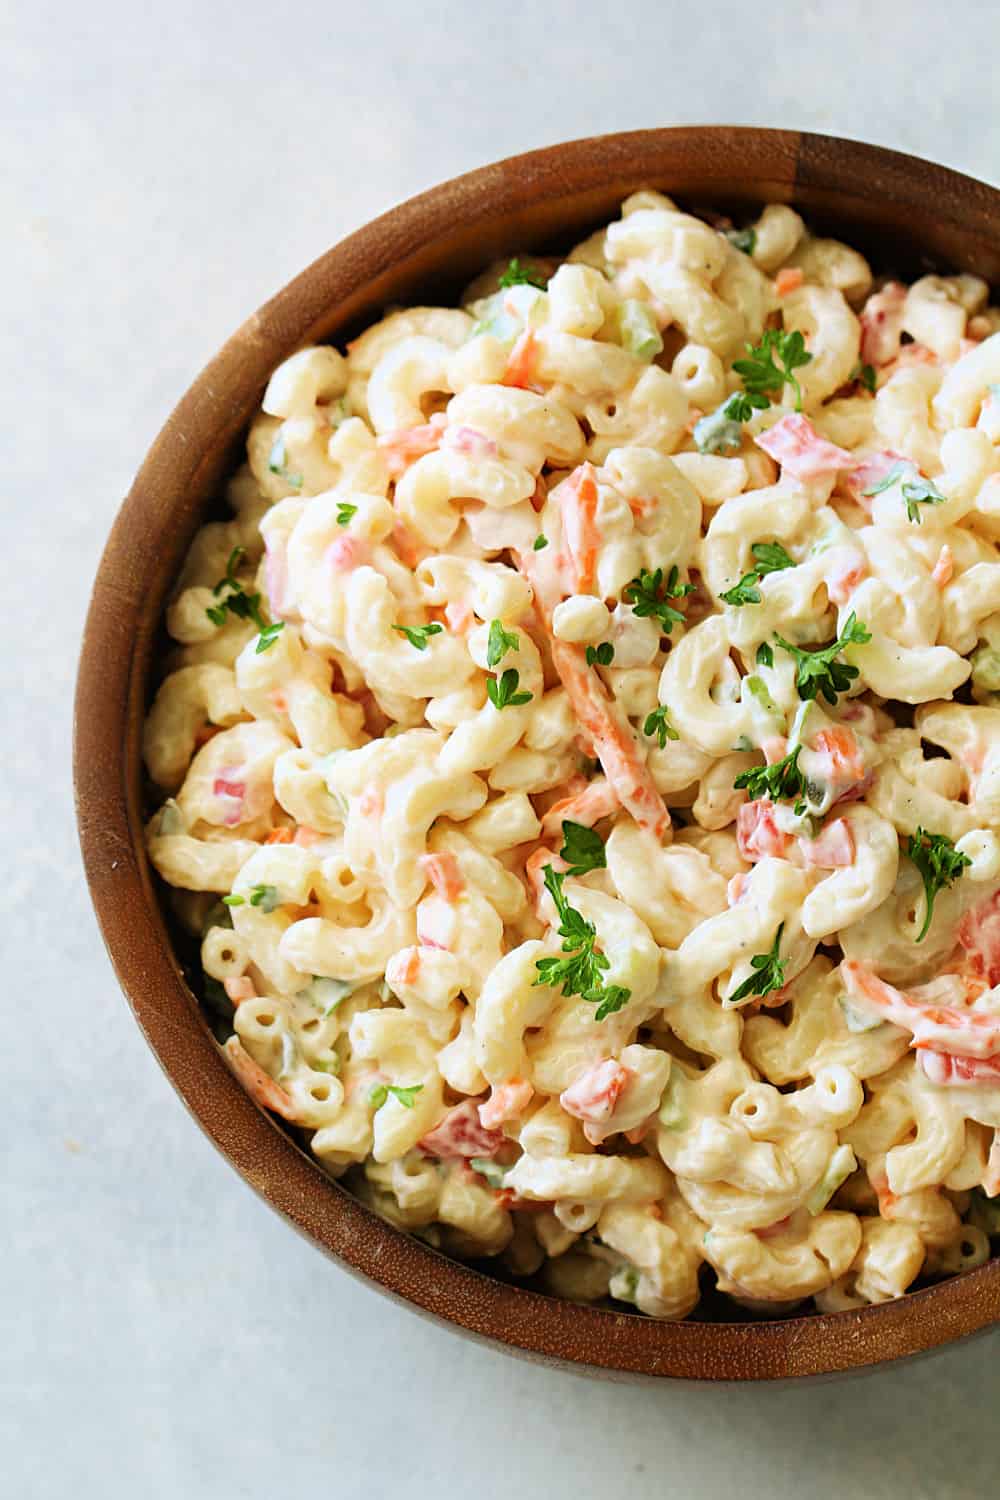 old fashioned macaroni salad recipe with ranch dressing